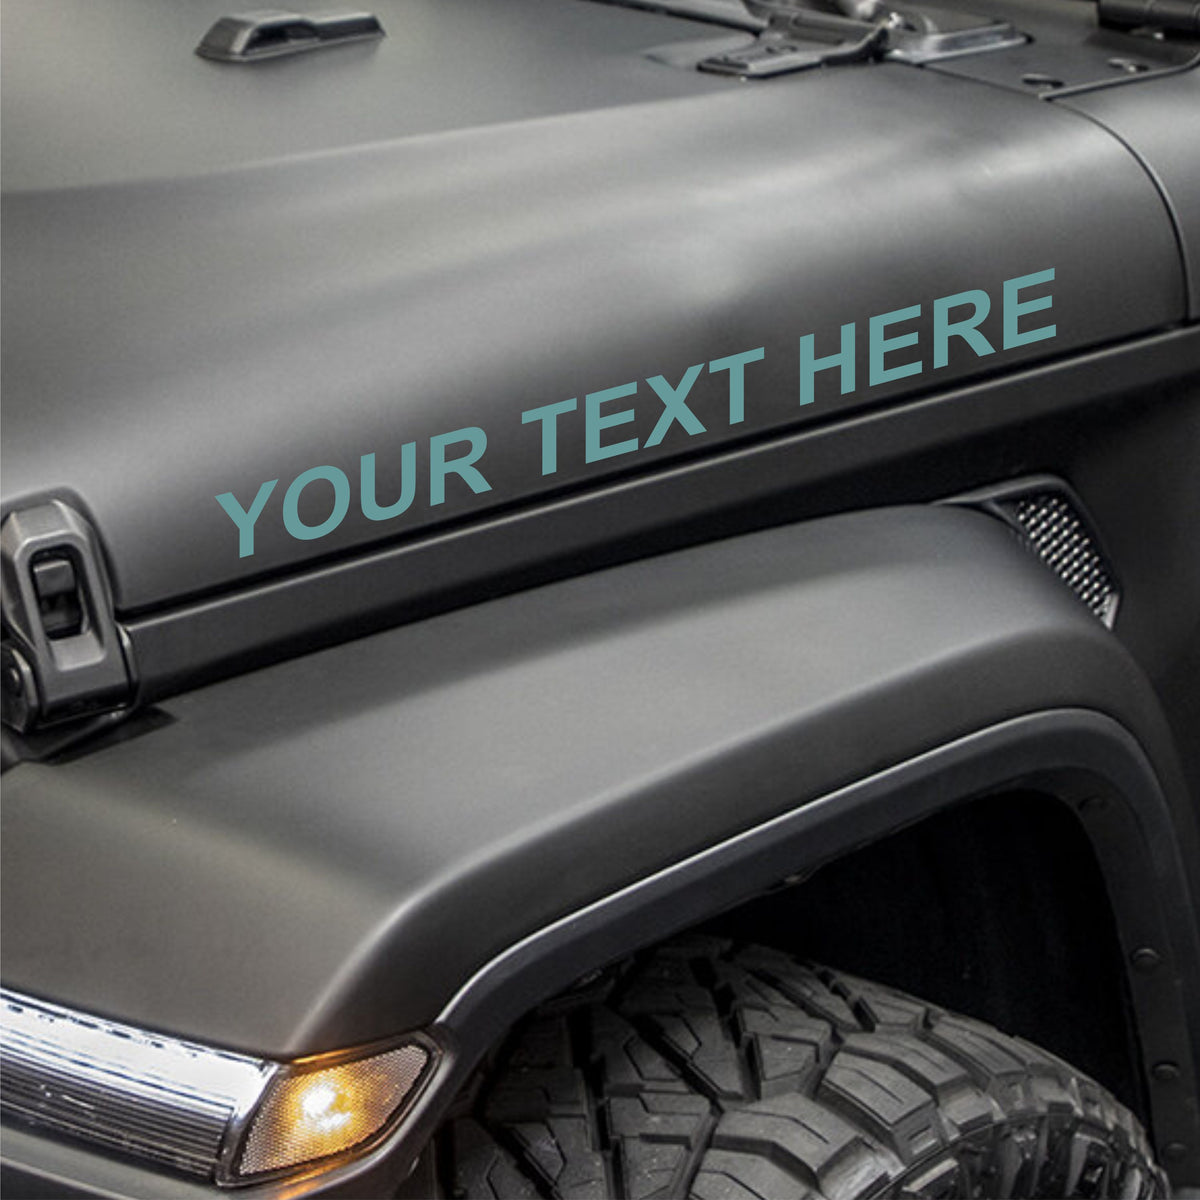 Set of 2 - Jeep Hood - Your Text Here - Vinyl Decals - Free Shipping